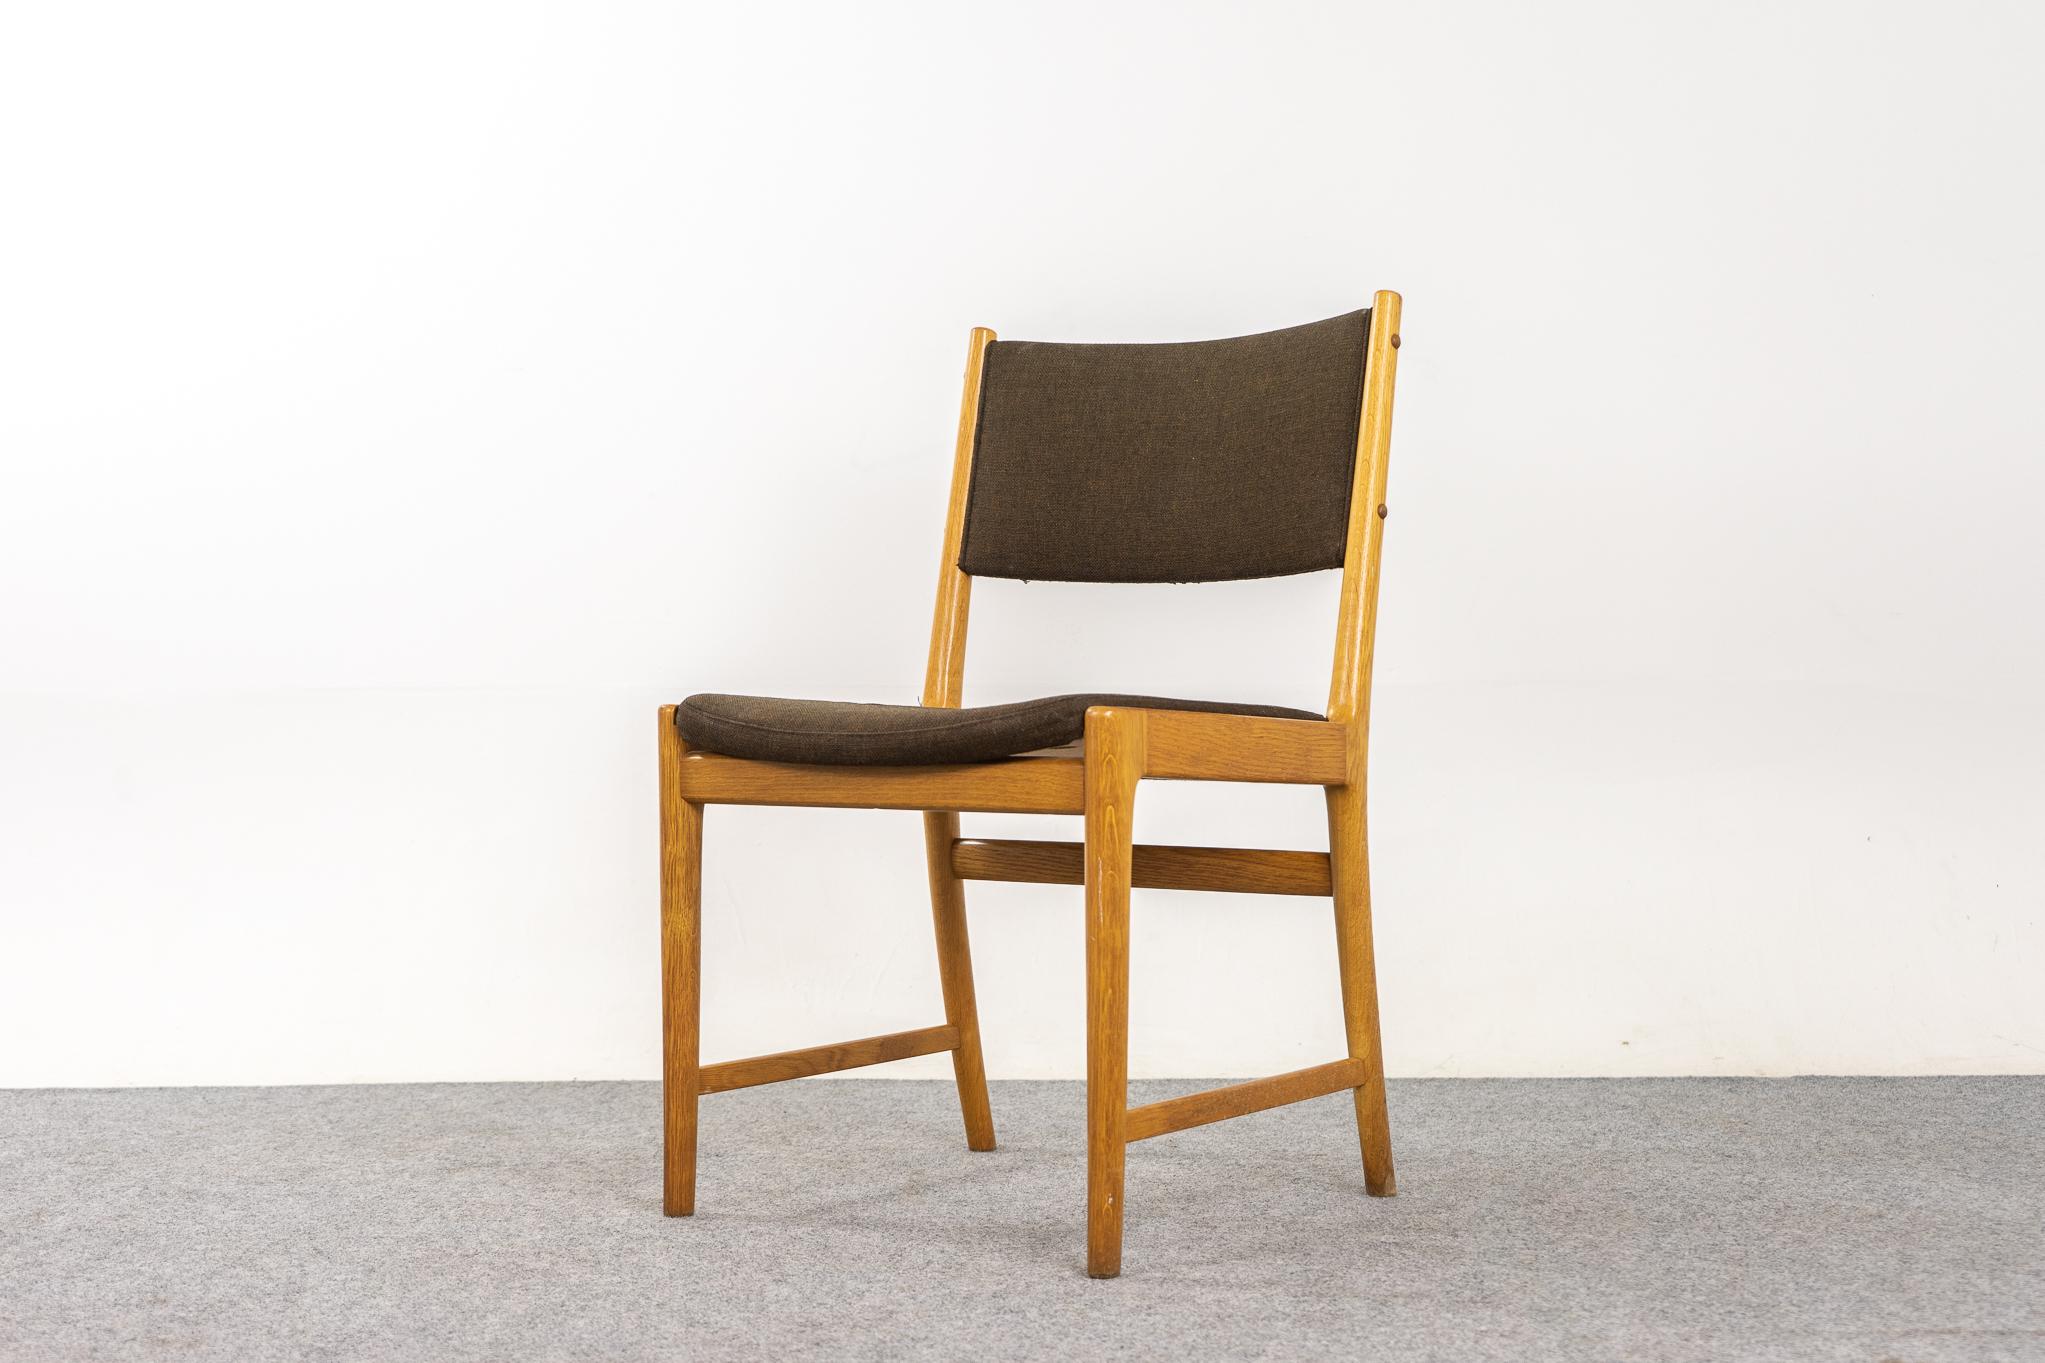 Oak Danish modern dining chairs by Kai Lyngfeldt Larsen, circa 1960's. Beautifully curved backrests and generous seat design provide support and comfort. Solid wood frame with beautifully wood grain. Cross braces add stability and support for years